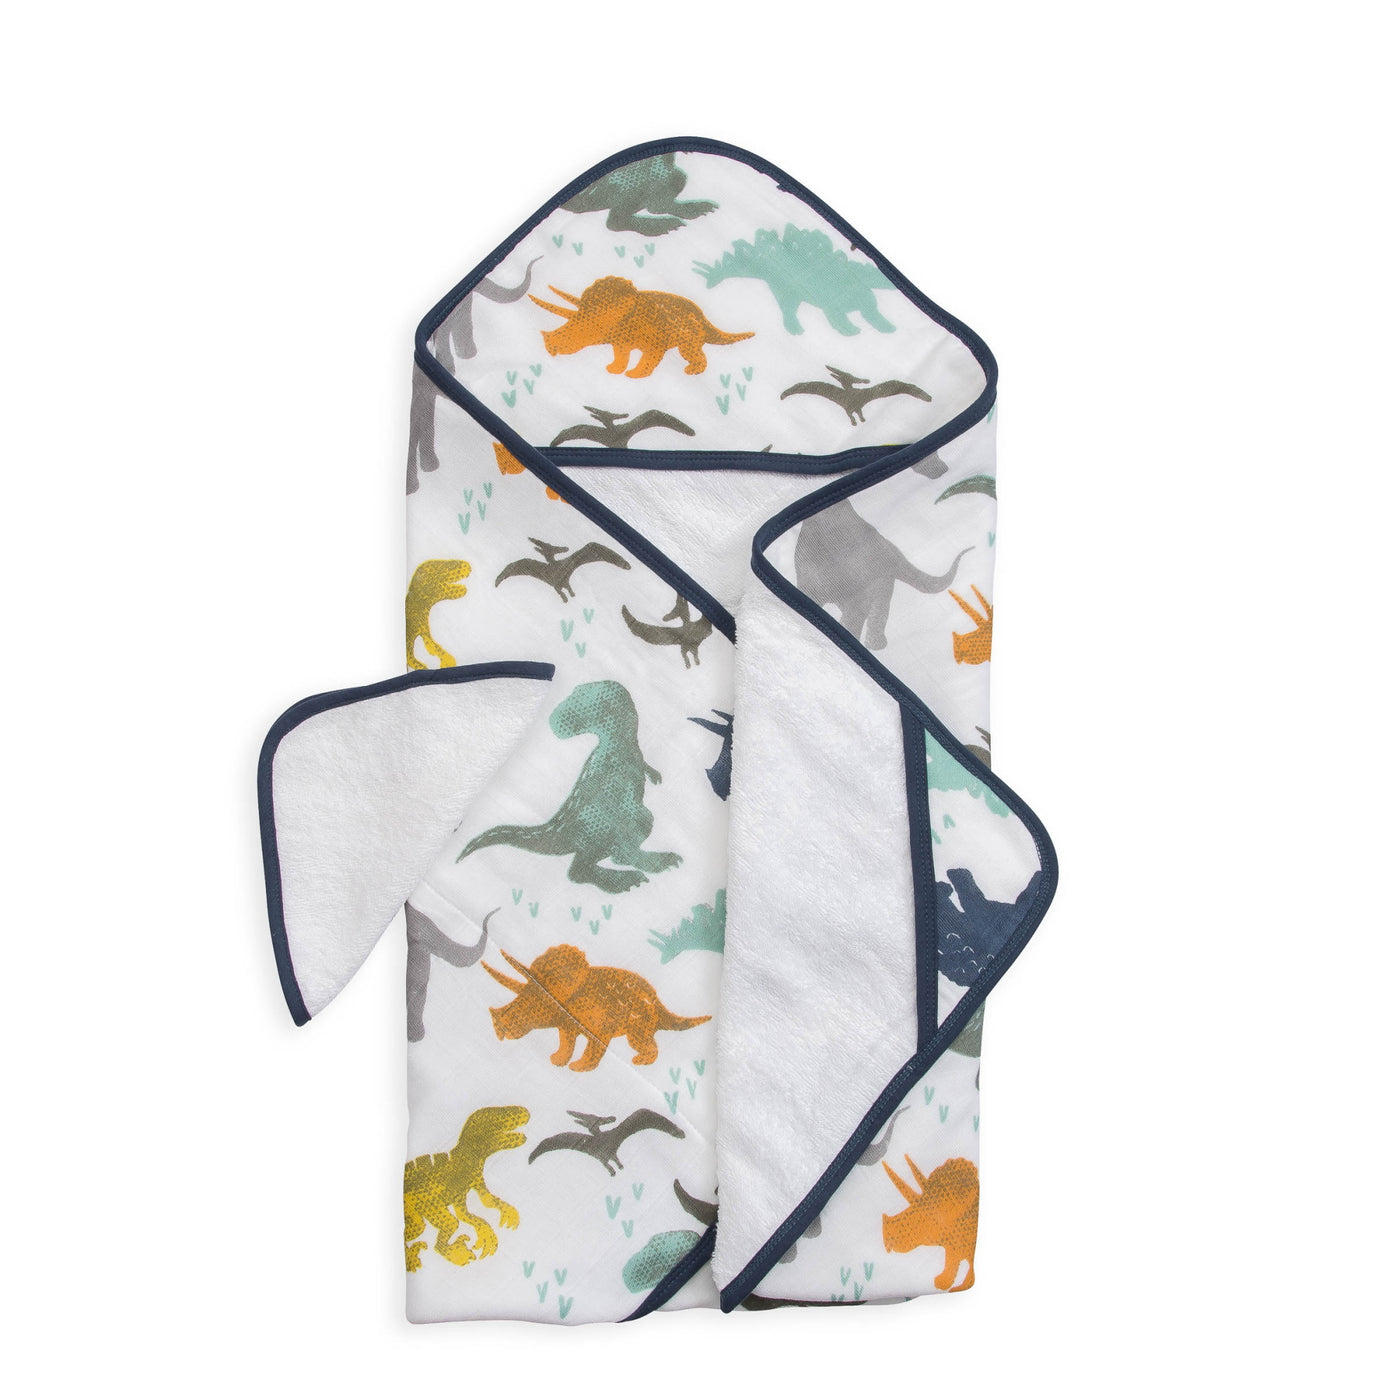 Hooded Towel & Wash Cloth - Dino Friends